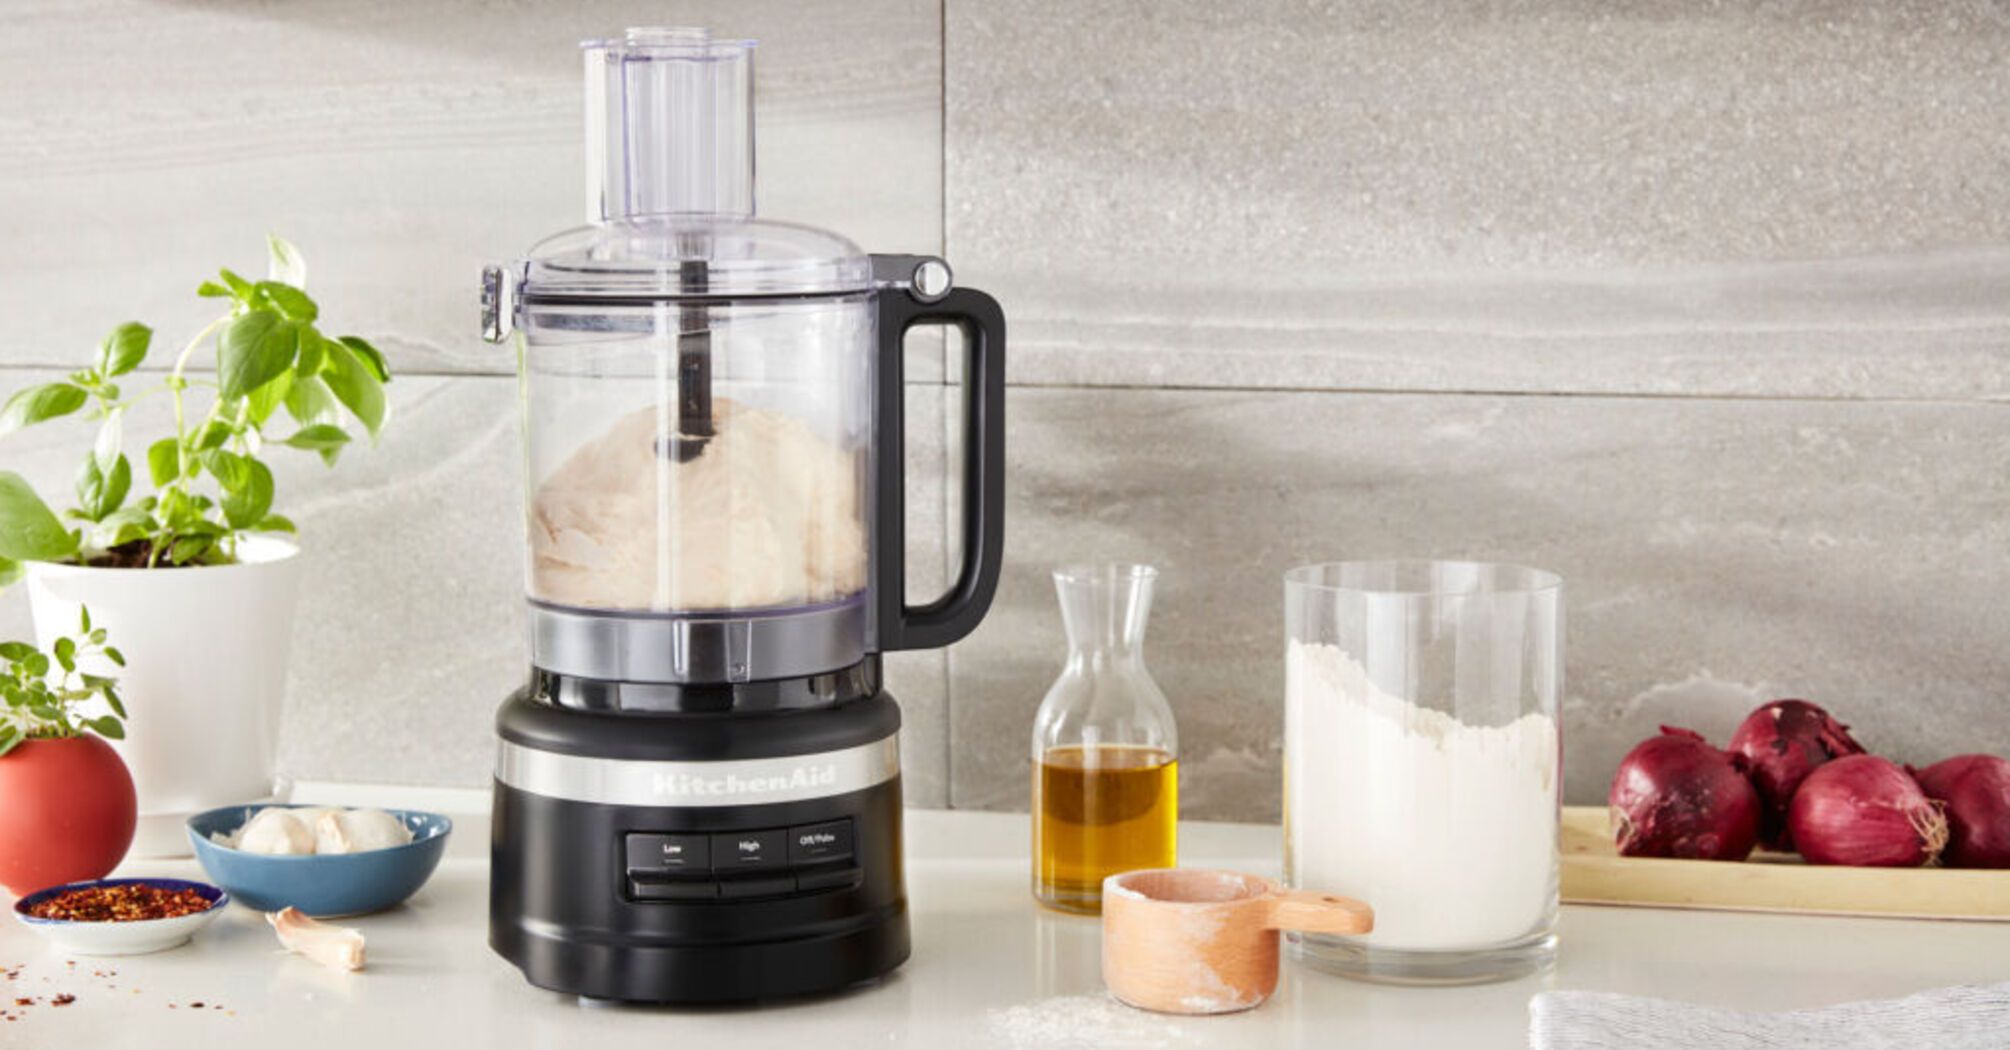 Pros and cons of buying a food processor